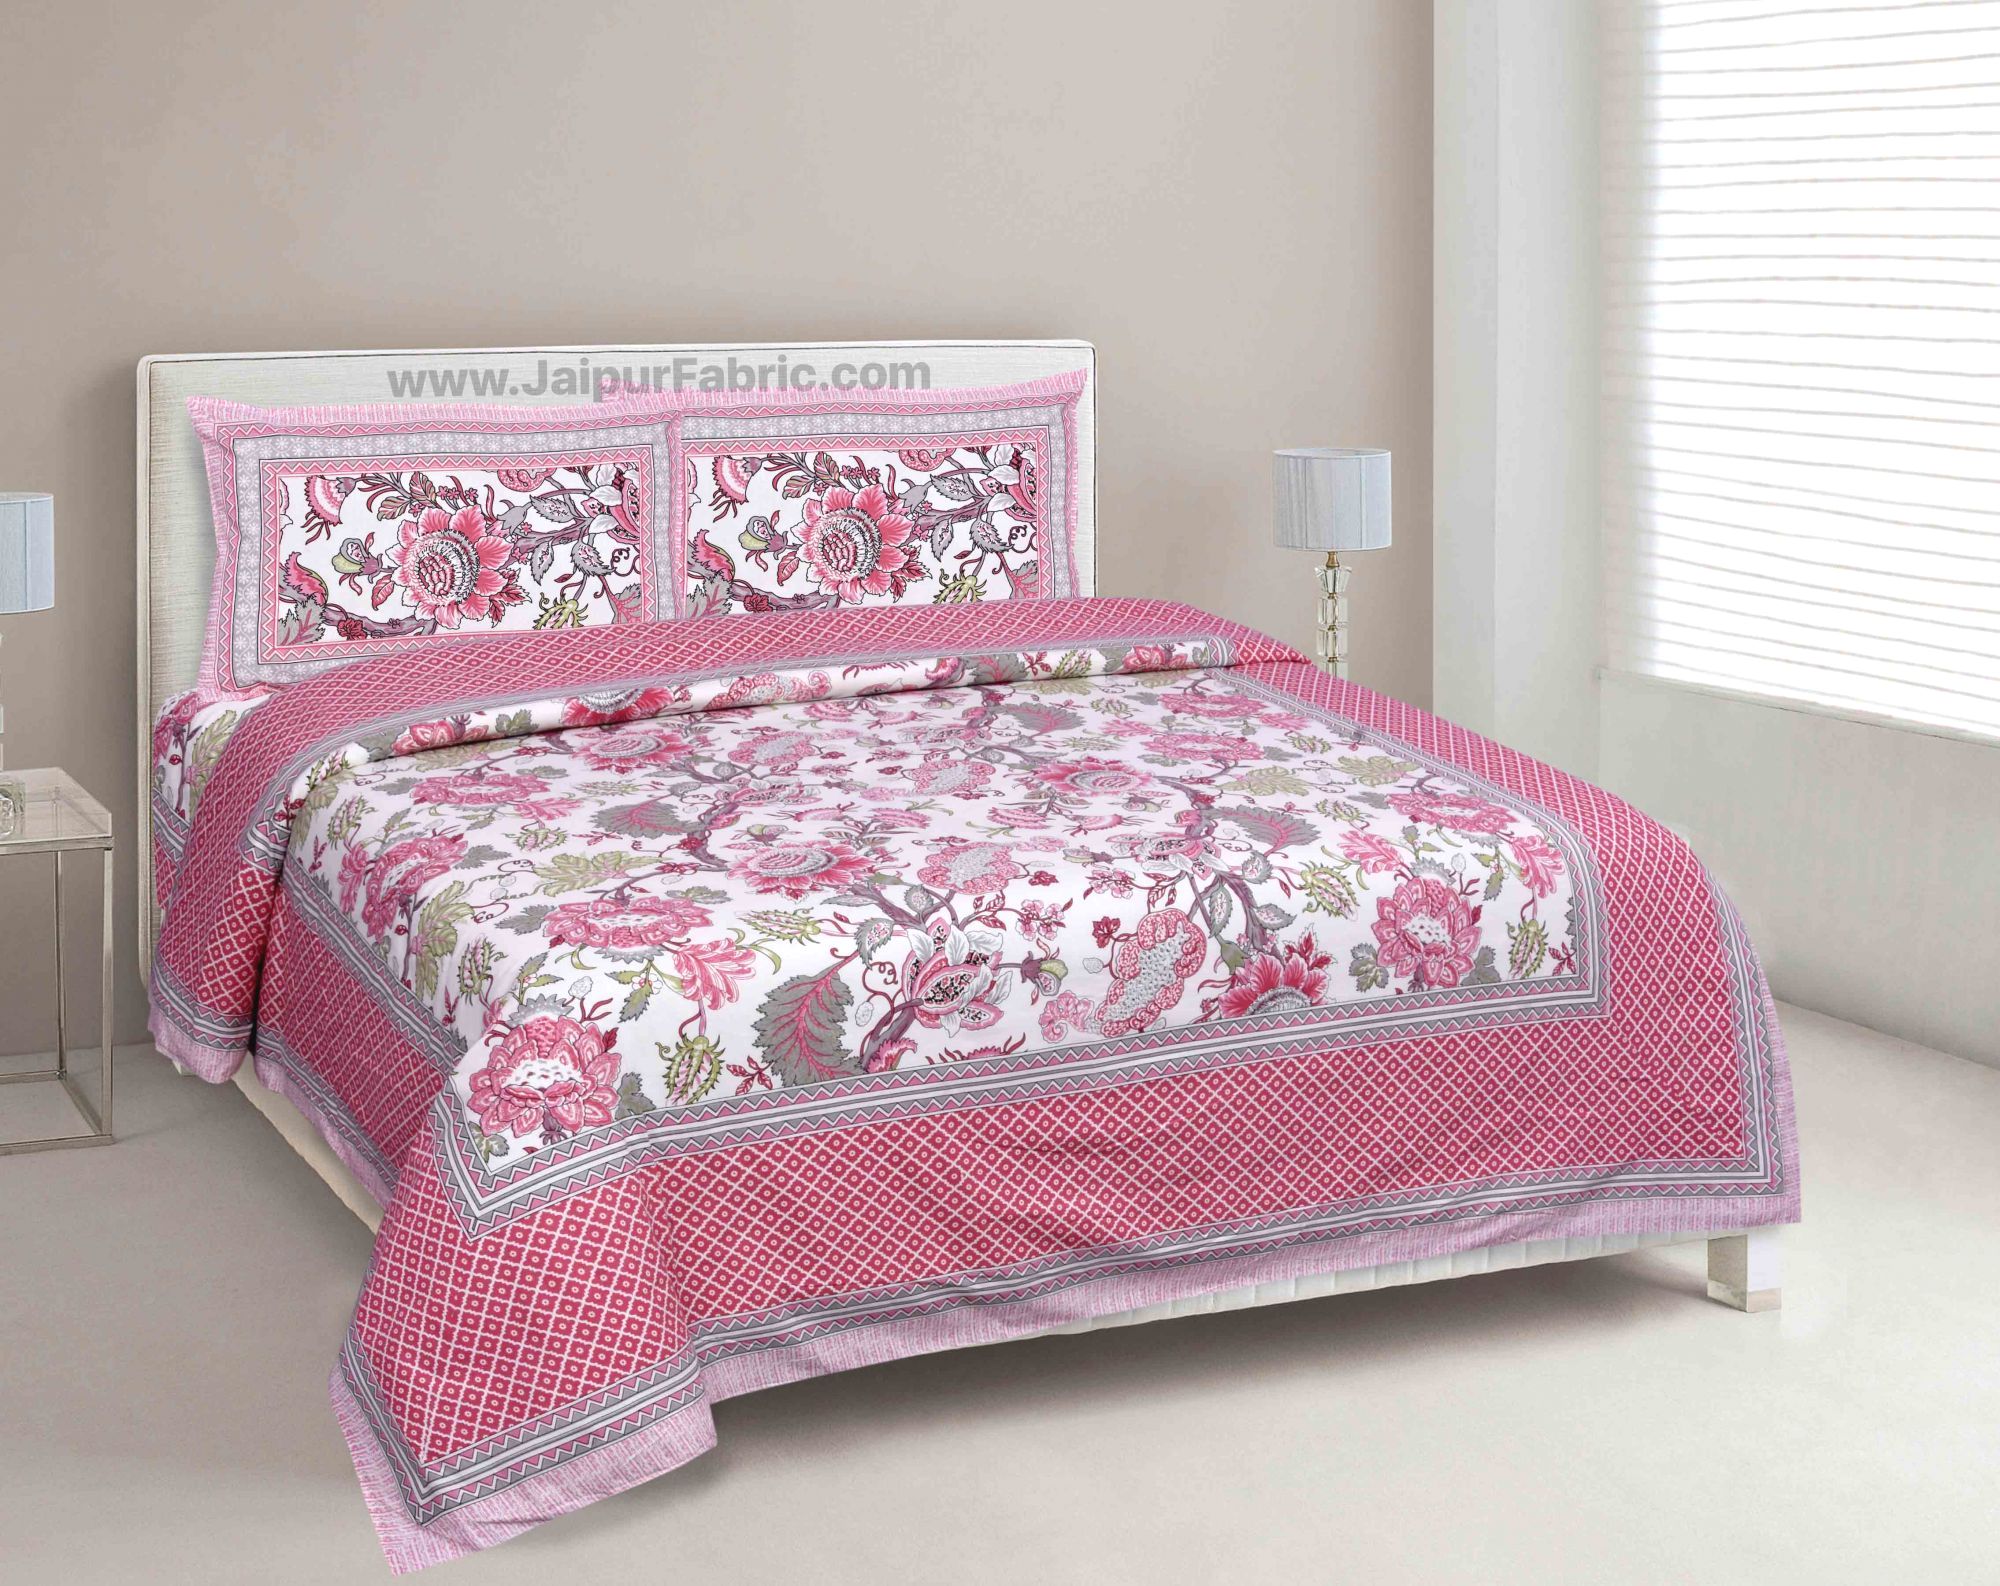 Combo372 Bed in a Bag Pink Floral  1 Dohar + 1 Double BedSheet + 2 Pillow Covers